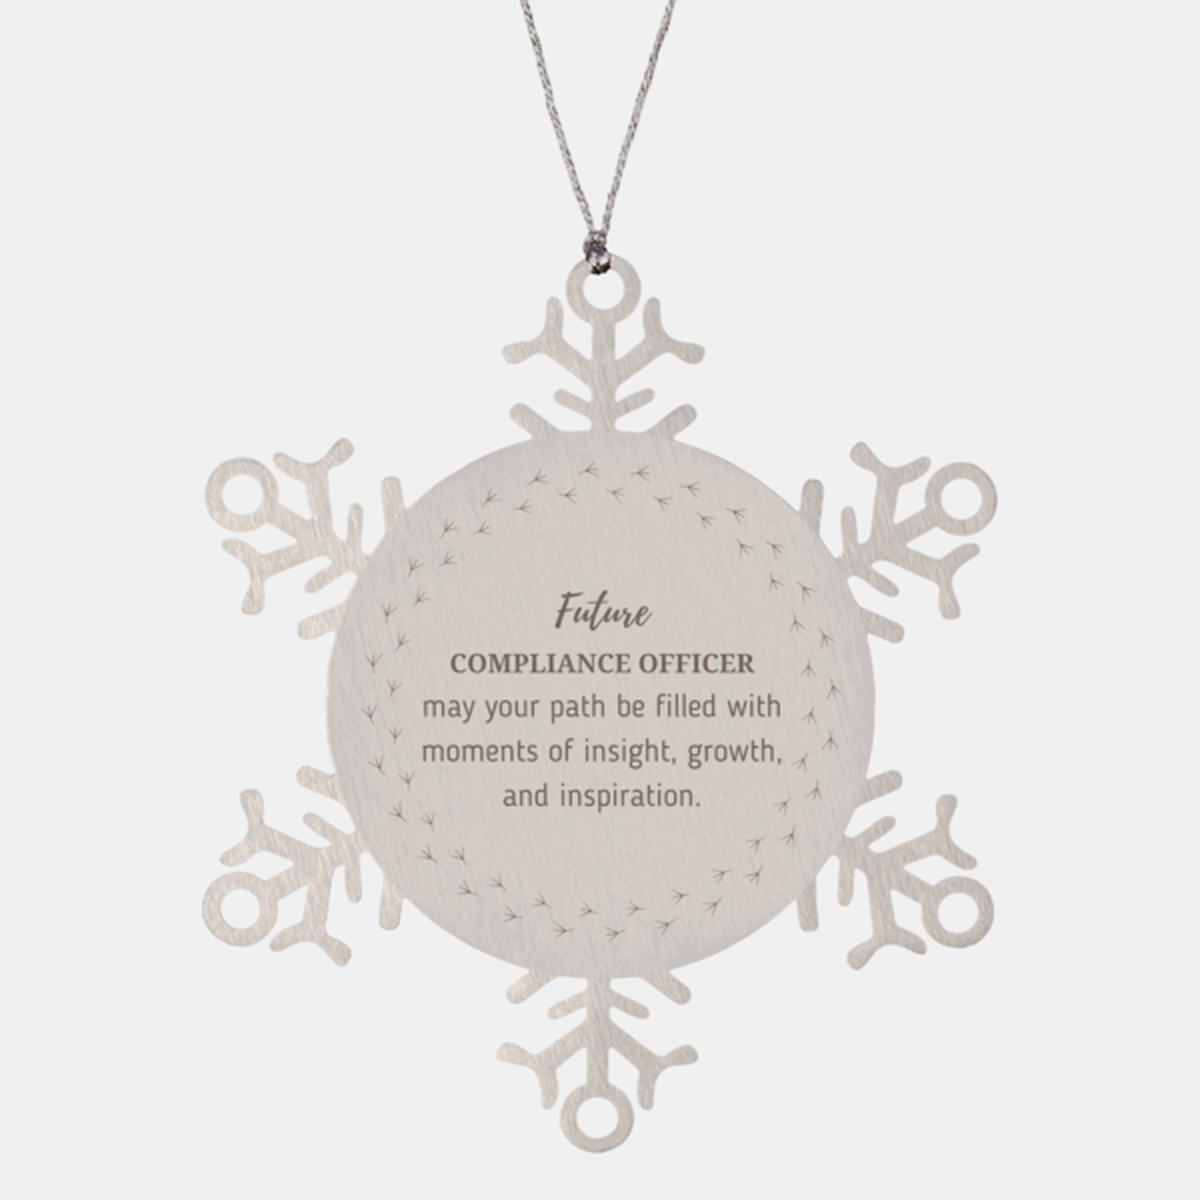 Future Compliance Officer Gifts, May your path be filled with moments of insight, Graduation Gifts for New Compliance Officer, Christmas Unique Snowflake Ornament For Men, Women, Friends